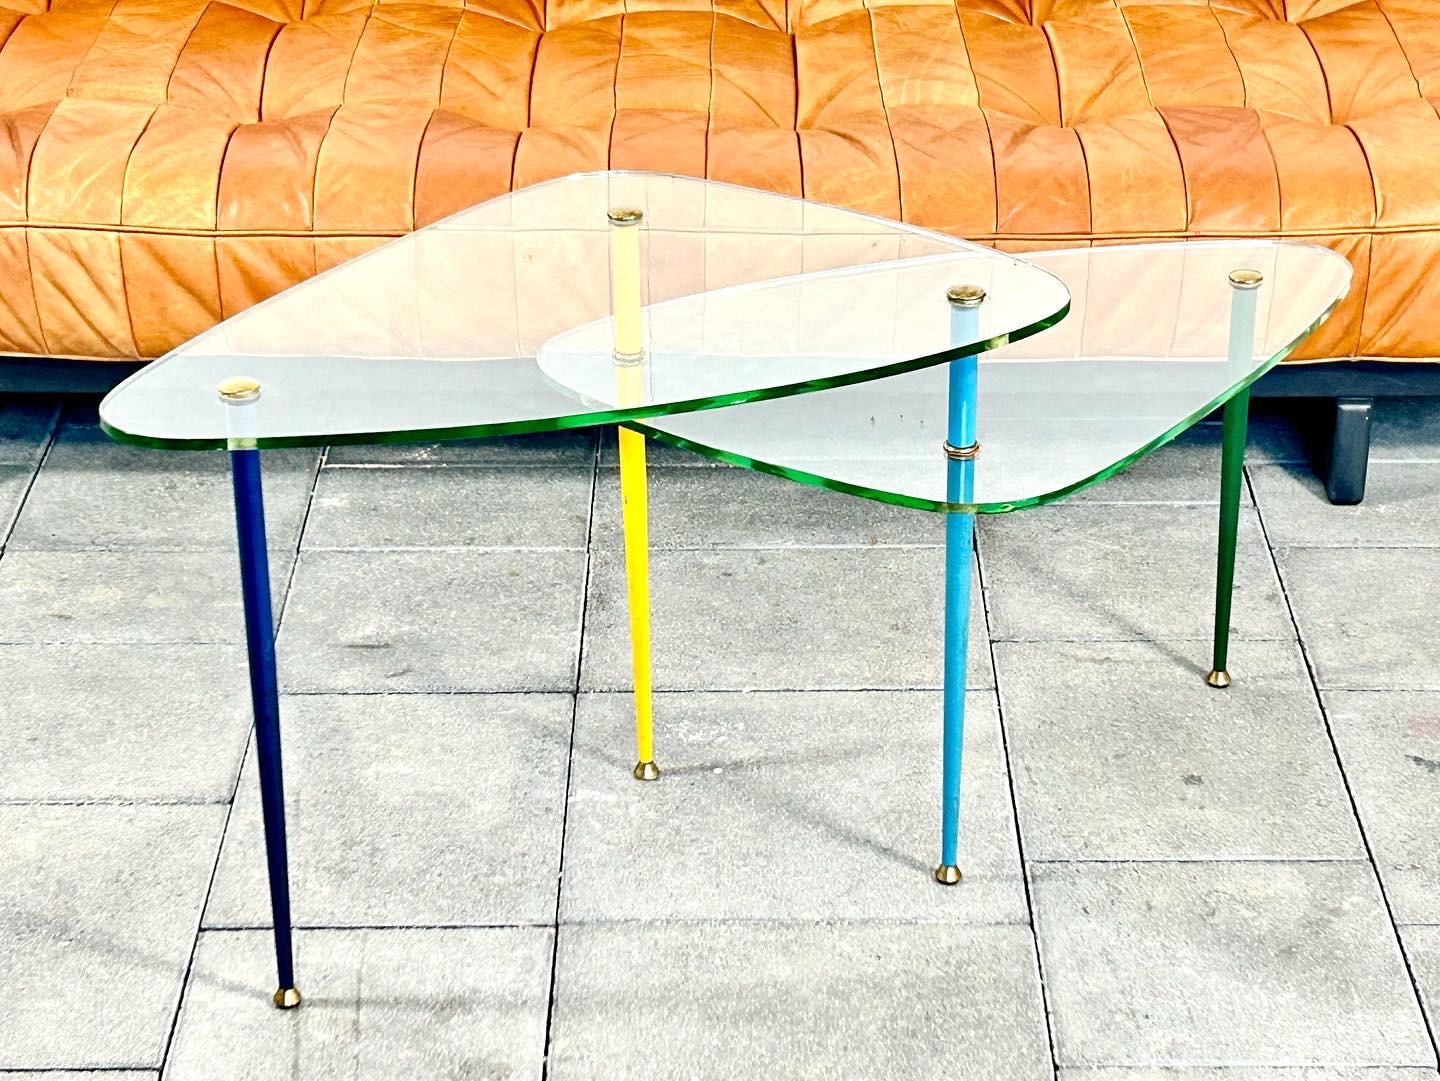 1950ies two-tiered Arlecchino side table designed by Eduardo Paoli in 1955.

Manufactured by Vitrex, Italy ca. in 1960.

Beautiful small side or coffee table designed by Edoardo Paoli for Vitrex. Looking at the details the tables parts revivals